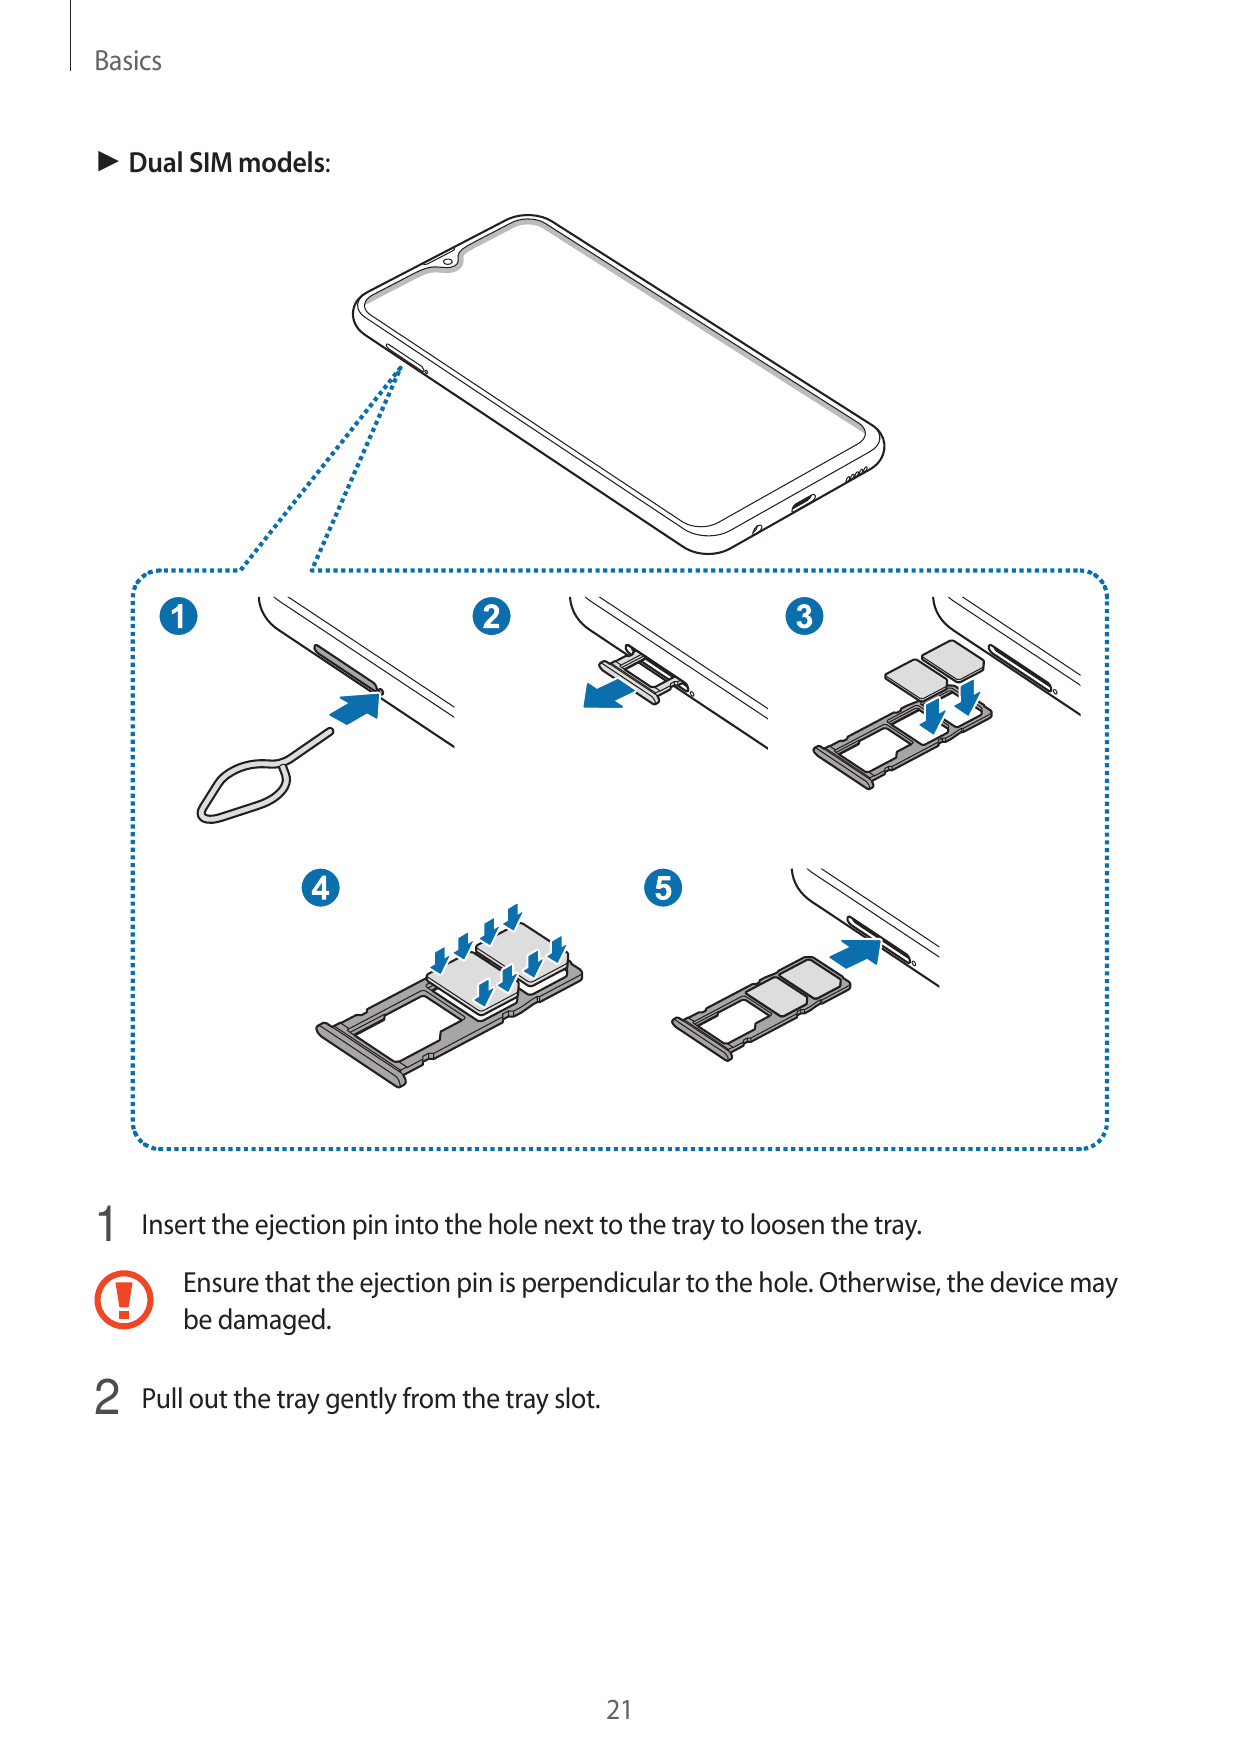 Basics► Dual SIM models:1 Insert the ejection pin into the hole next to the tray to loosen the tray.Ensure that the ejection pin